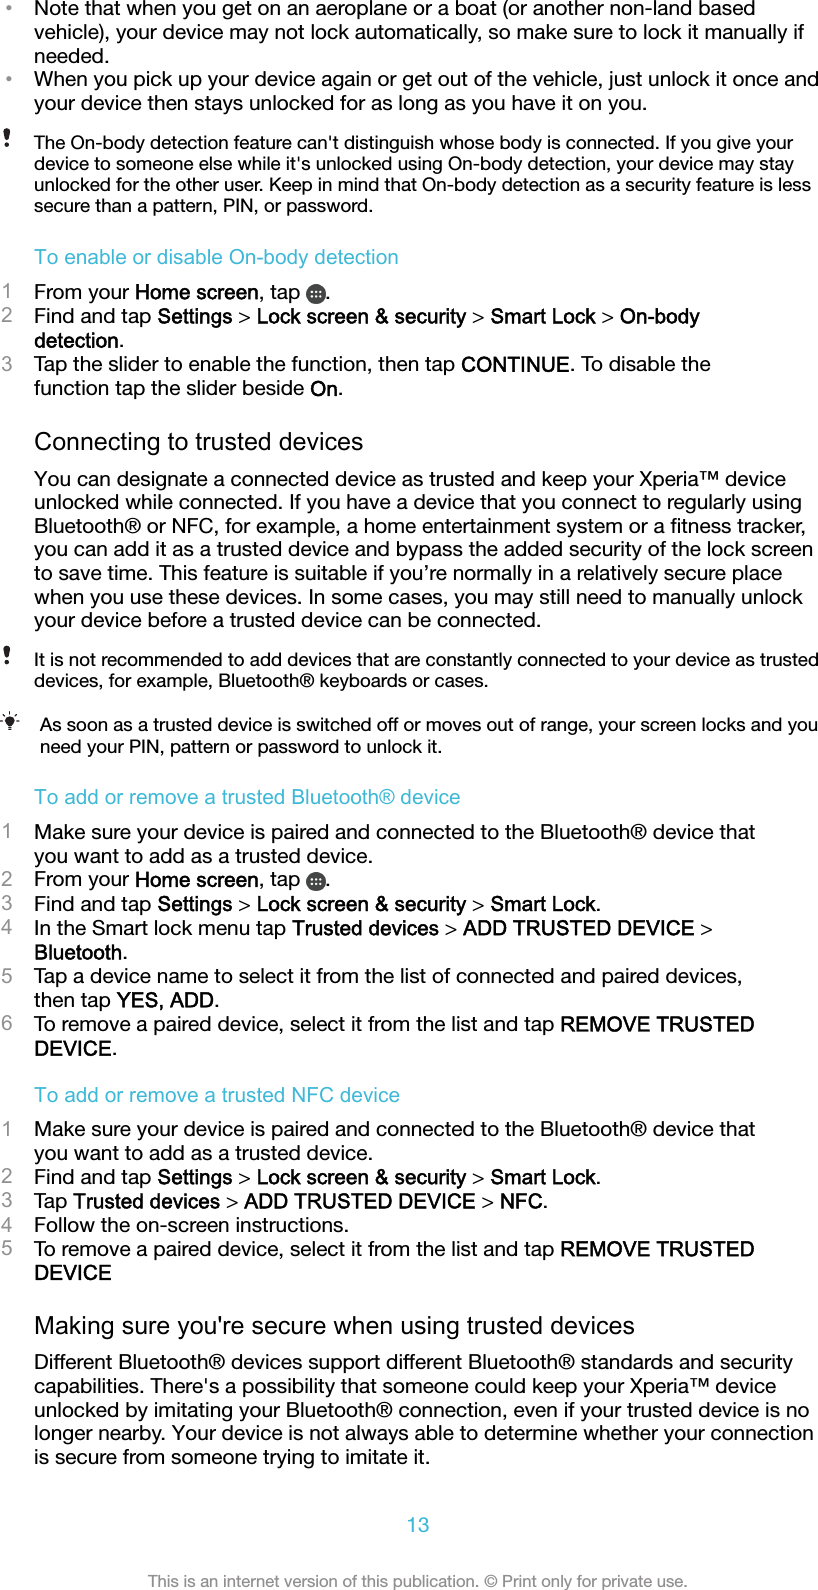 •Note that when you get on an aeroplane or a boat (or another non-land basedvehicle), your device may not lock automatically, so make sure to lock it manually ifneeded.•When you pick up your device again or get out of the vehicle, just unlock it once andyour device then stays unlocked for as long as you have it on you.The On-body detection feature can&apos;t distinguish whose body is connected. If you give yourdevice to someone else while it&apos;s unlocked using On-body detection, your device may stayunlocked for the other user. Keep in mind that On-body detection as a security feature is lesssecure than a pattern, PIN, or password.To enable or disable On-body detection1From your Home screen, tap  .2Find and tap Settings &gt; Lock screen &amp; security &gt; Smart Lock &gt; On-bodydetection.3Tap the slider to enable the function, then tap CONTINUE. To disable thefunction tap the slider beside On.Connecting to trusted devicesYou can designate a connected device as trusted and keep your Xperia™ deviceunlocked while connected. If you have a device that you connect to regularly usingBluetooth® or NFC, for example, a home entertainment system or a ﬁtness tracker,you can add it as a trusted device and bypass the added security of the lock screento save time. This feature is suitable if you’re normally in a relatively secure placewhen you use these devices. In some cases, you may still need to manually unlockyour device before a trusted device can be connected.It is not recommended to add devices that are constantly connected to your device as trusteddevices, for example, Bluetooth® keyboards or cases.As soon as a trusted device is switched off or moves out of range, your screen locks and youneed your PIN, pattern or password to unlock it.To add or remove a trusted Bluetooth® device1Make sure your device is paired and connected to the Bluetooth® device thatyou want to add as a trusted device.2From your Home screen, tap  .3Find and tap Settings &gt; Lock screen &amp; security &gt; Smart Lock.4In the Smart lock menu tap Trusted devices &gt; ADD TRUSTED DEVICE &gt;Bluetooth.5Tap a device name to select it from the list of connected and paired devices,then tap YES, ADD.6To remove a paired device, select it from the list and tap REMOVE TRUSTEDDEVICE.To add or remove a trusted NFC device1Make sure your device is paired and connected to the Bluetooth® device thatyou want to add as a trusted device.2Find and tap Settings &gt; Lock screen &amp; security &gt; Smart Lock.3Tap Trusted devices &gt; ADD TRUSTED DEVICE &gt; NFC.4Follow the on-screen instructions.5To remove a paired device, select it from the list and tap REMOVE TRUSTEDDEVICEMaking sure you&apos;re secure when using trusted devicesDifferent Bluetooth® devices support different Bluetooth® standards and securitycapabilities. There&apos;s a possibility that someone could keep your Xperia™ deviceunlocked by imitating your Bluetooth® connection, even if your trusted device is nolonger nearby. Your device is not always able to determine whether your connectionis secure from someone trying to imitate it.13This is an internet version of this publication. © Print only for private use.